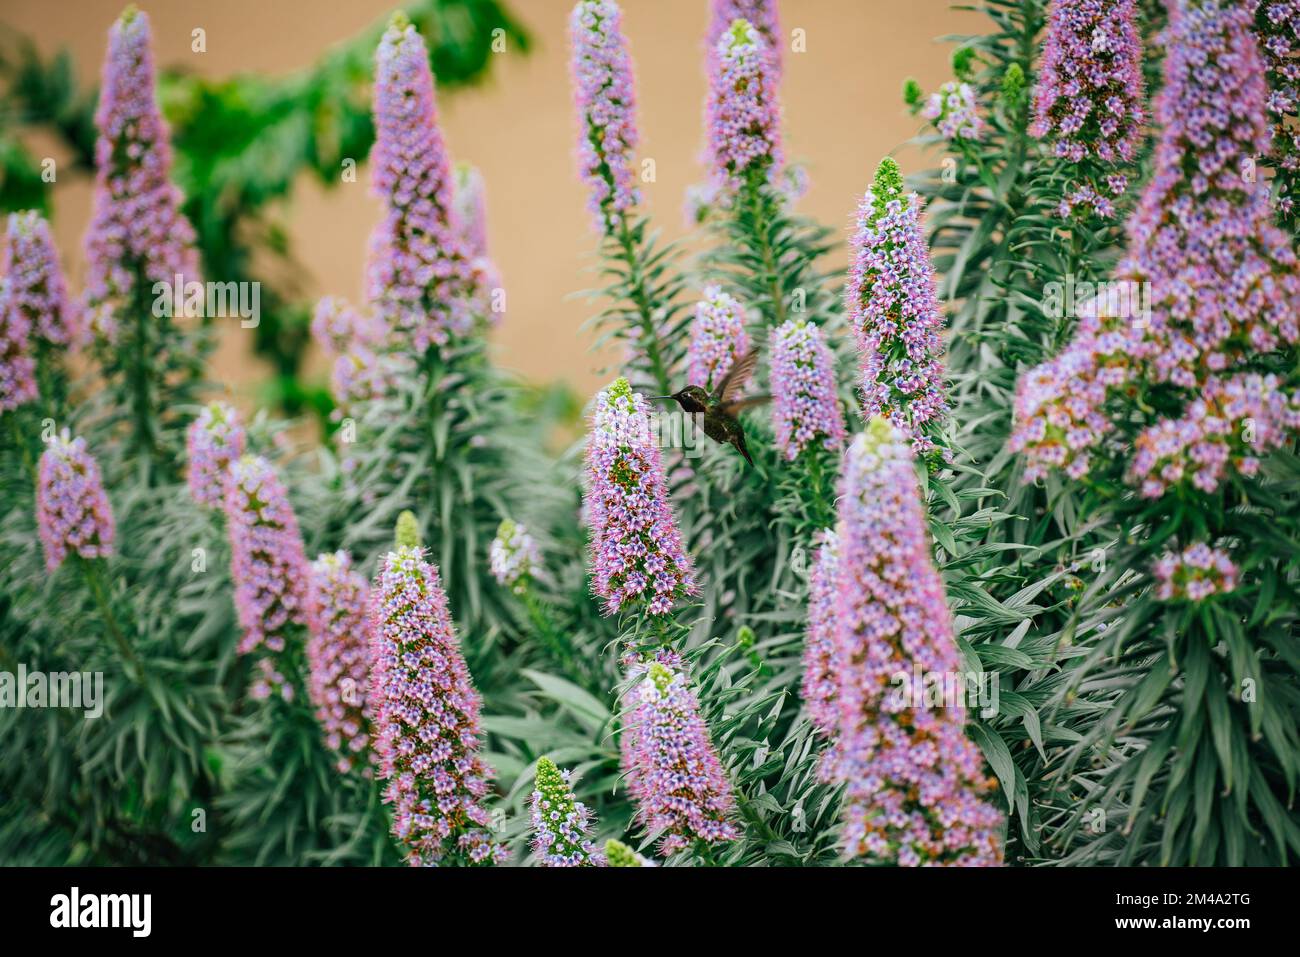 The Pride of Madeira flowers i bloom, Echium candicans, beautiful tropical evergreen flowers in bloom Stock Photo